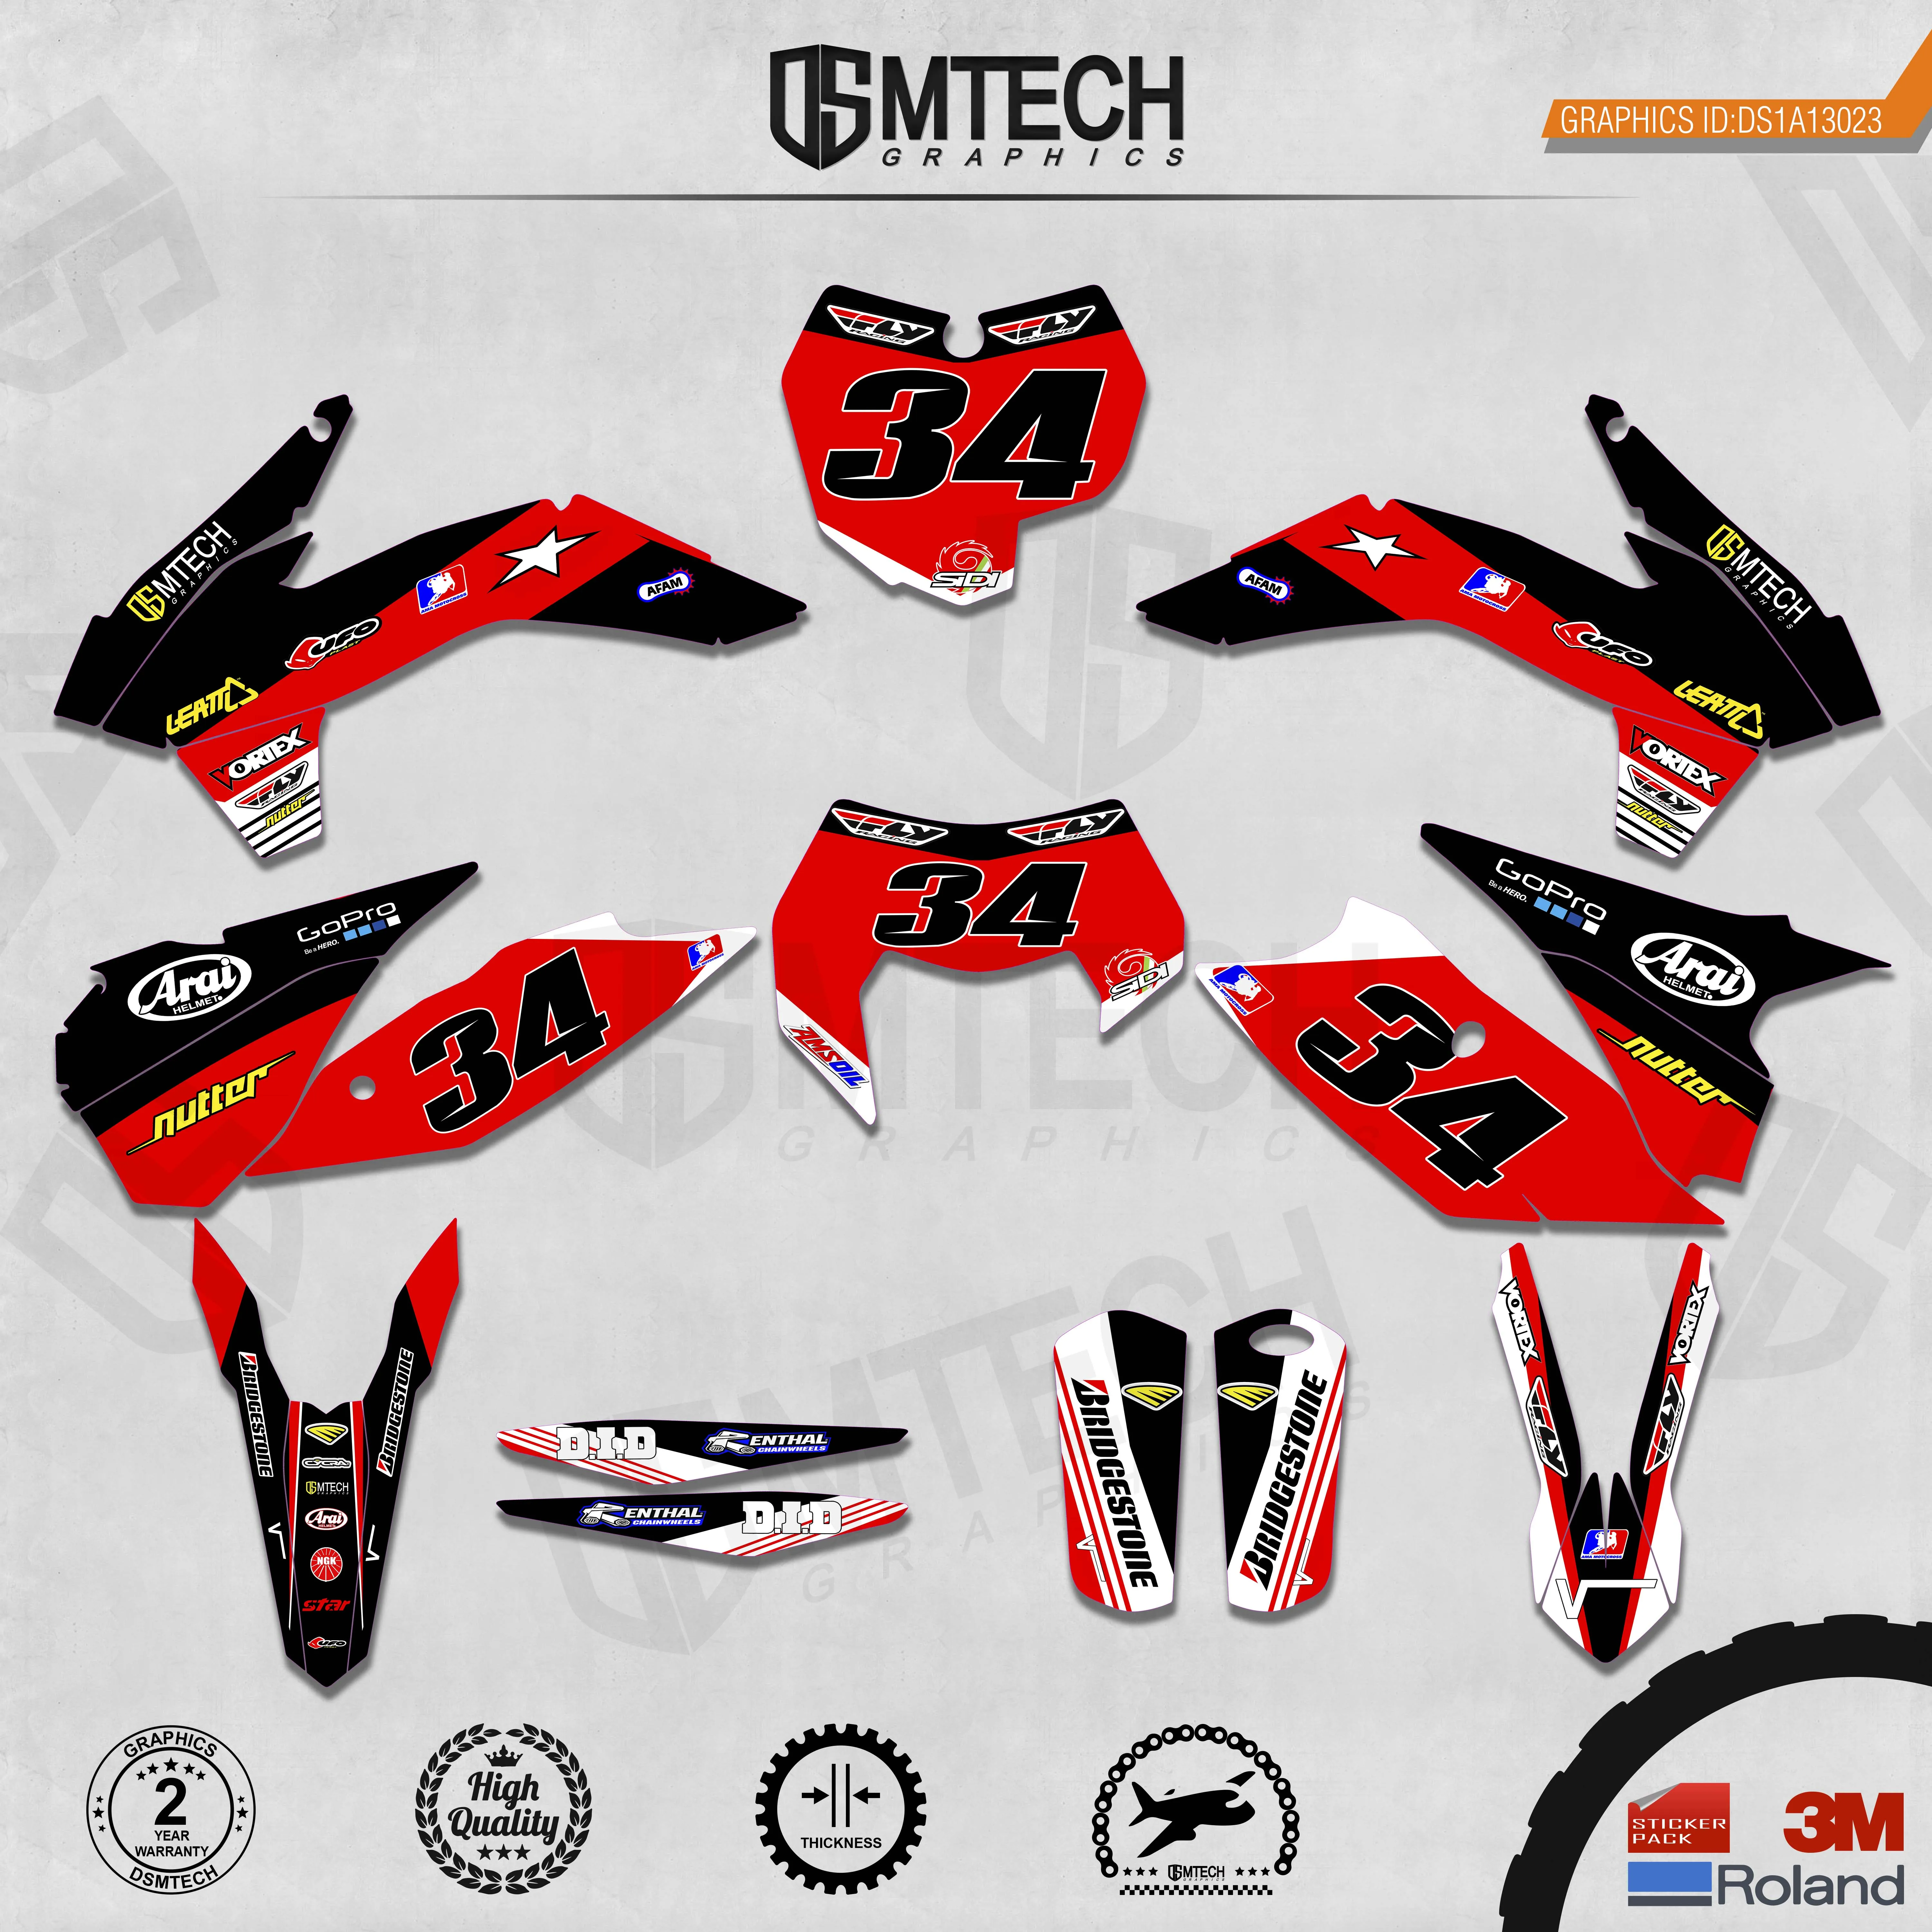 DSMTECH Customized Team Graphics Backgrounds Decals 3M Custom Stickers For 2013-2014 SXF 2015 SXF 2014-2015 EXC 2016 EXC  023